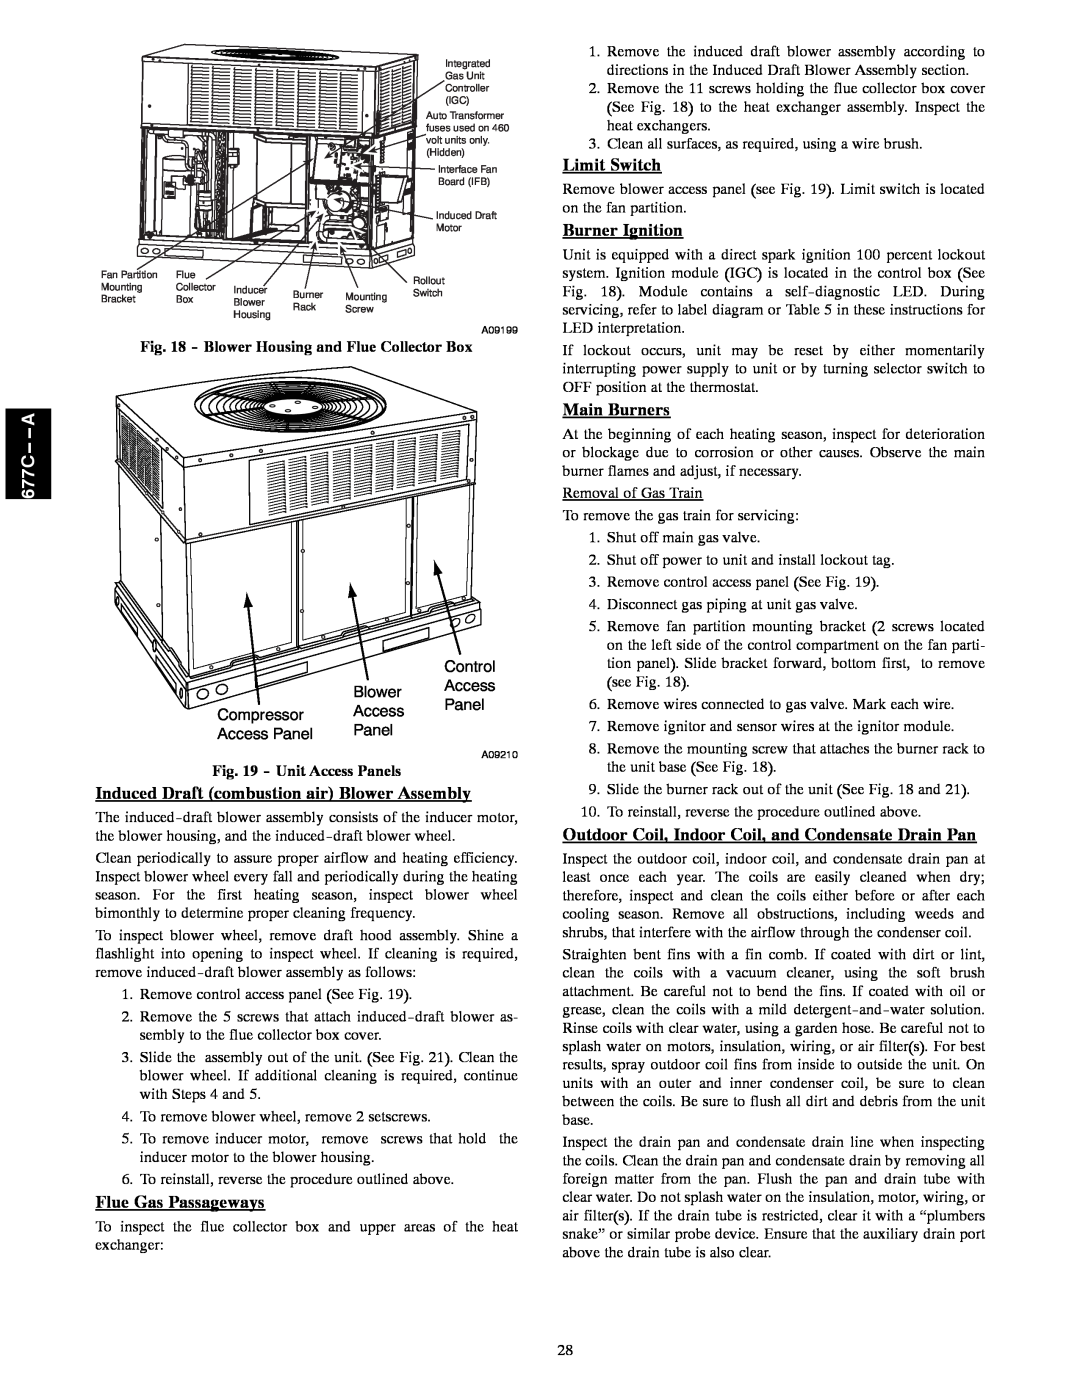 Bryant 677C--A Limit Switch, Burner Ignition, Induced Draft combustion air Blower Assembly, Flue Gas Passageways 